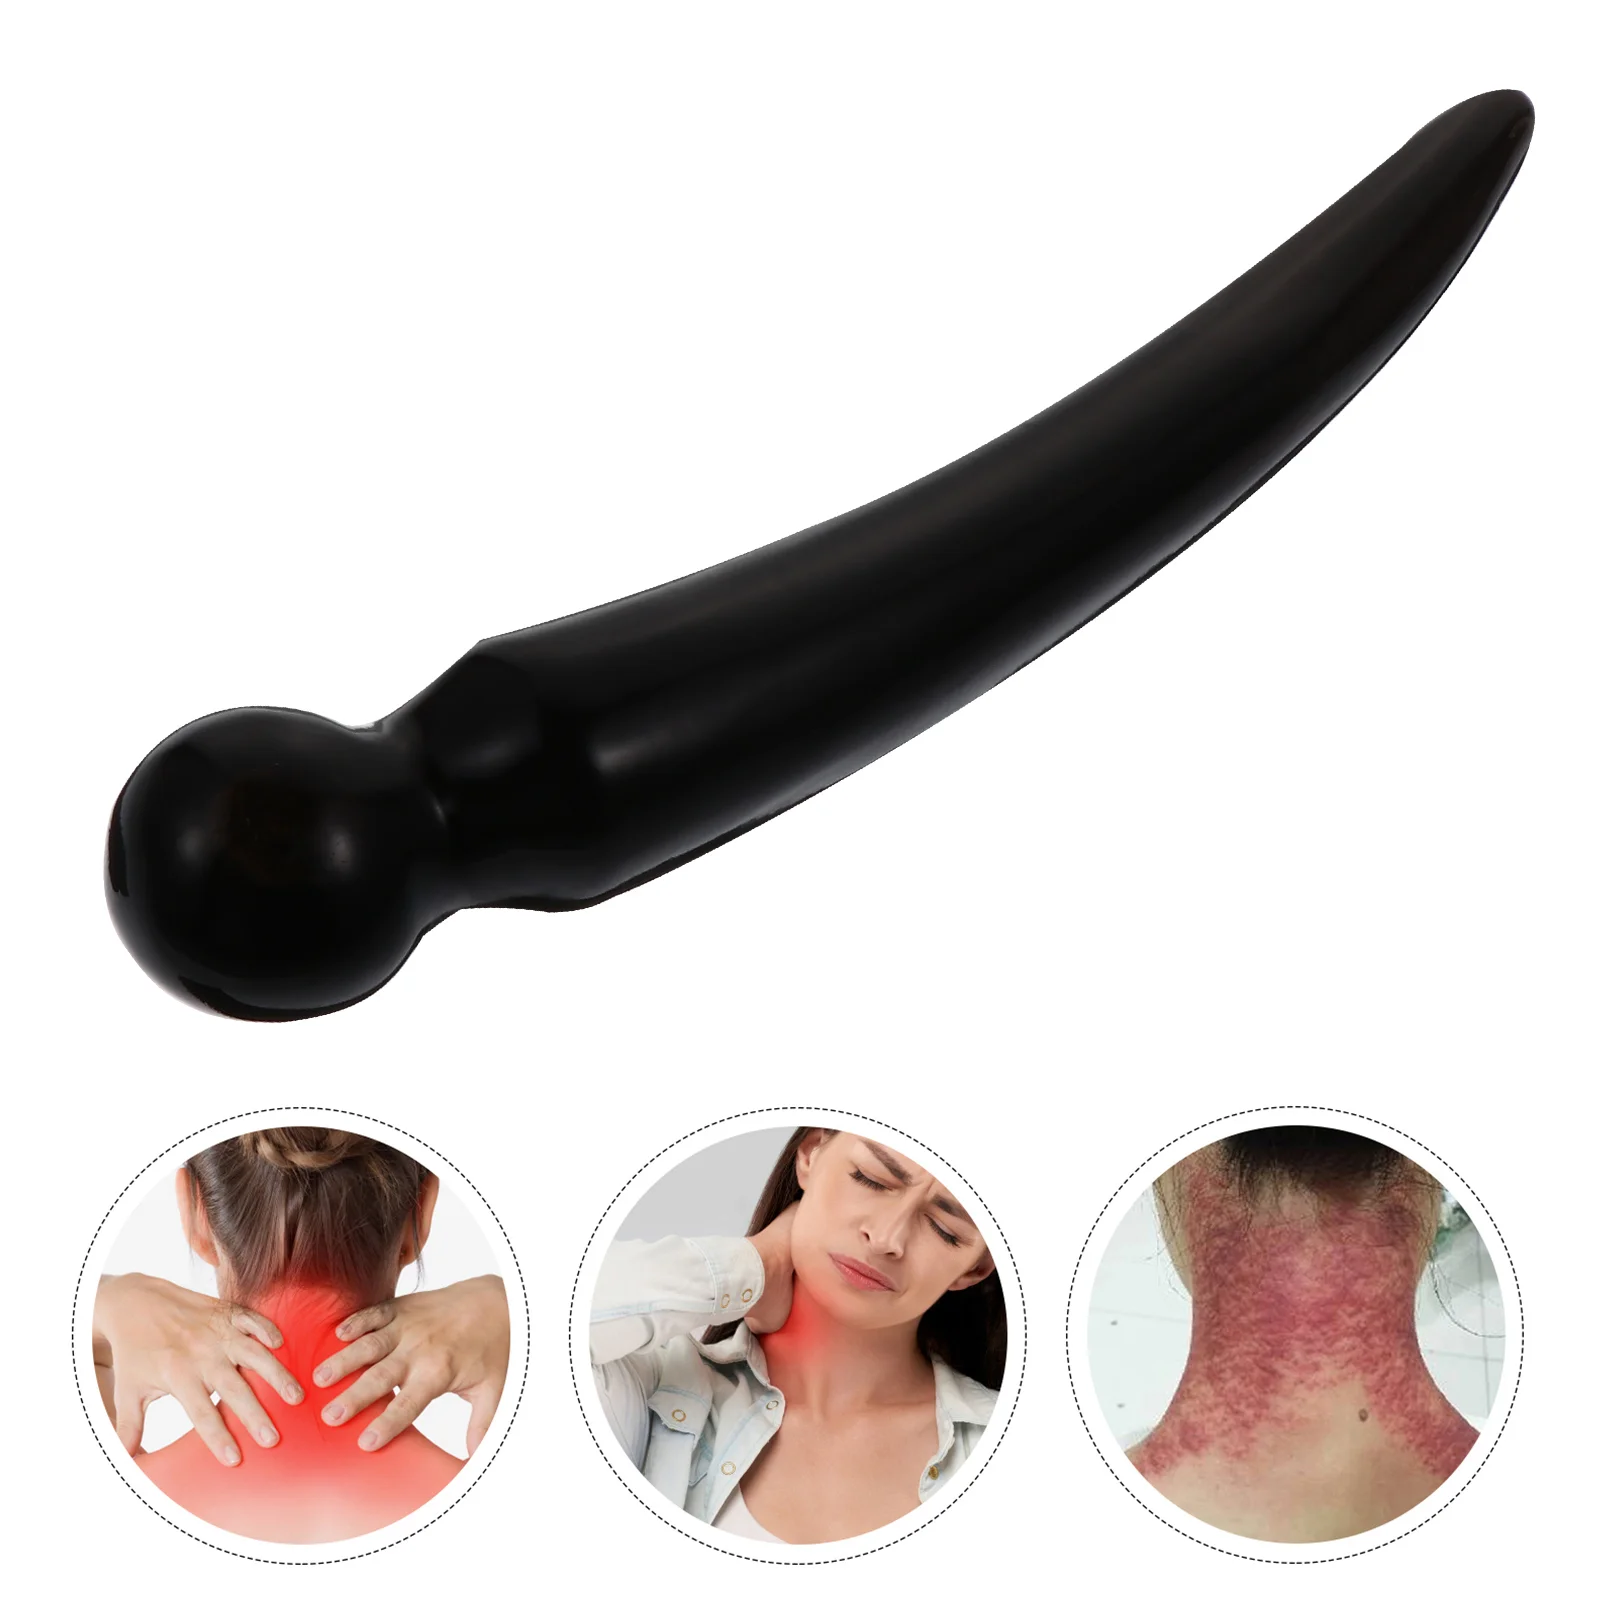 

Muscle Pulling Stick Body Hand Foot Acupoint Massage Rod Scrapping Rods Massage Stick Scraping Stick Body Care Natural Ox Horns